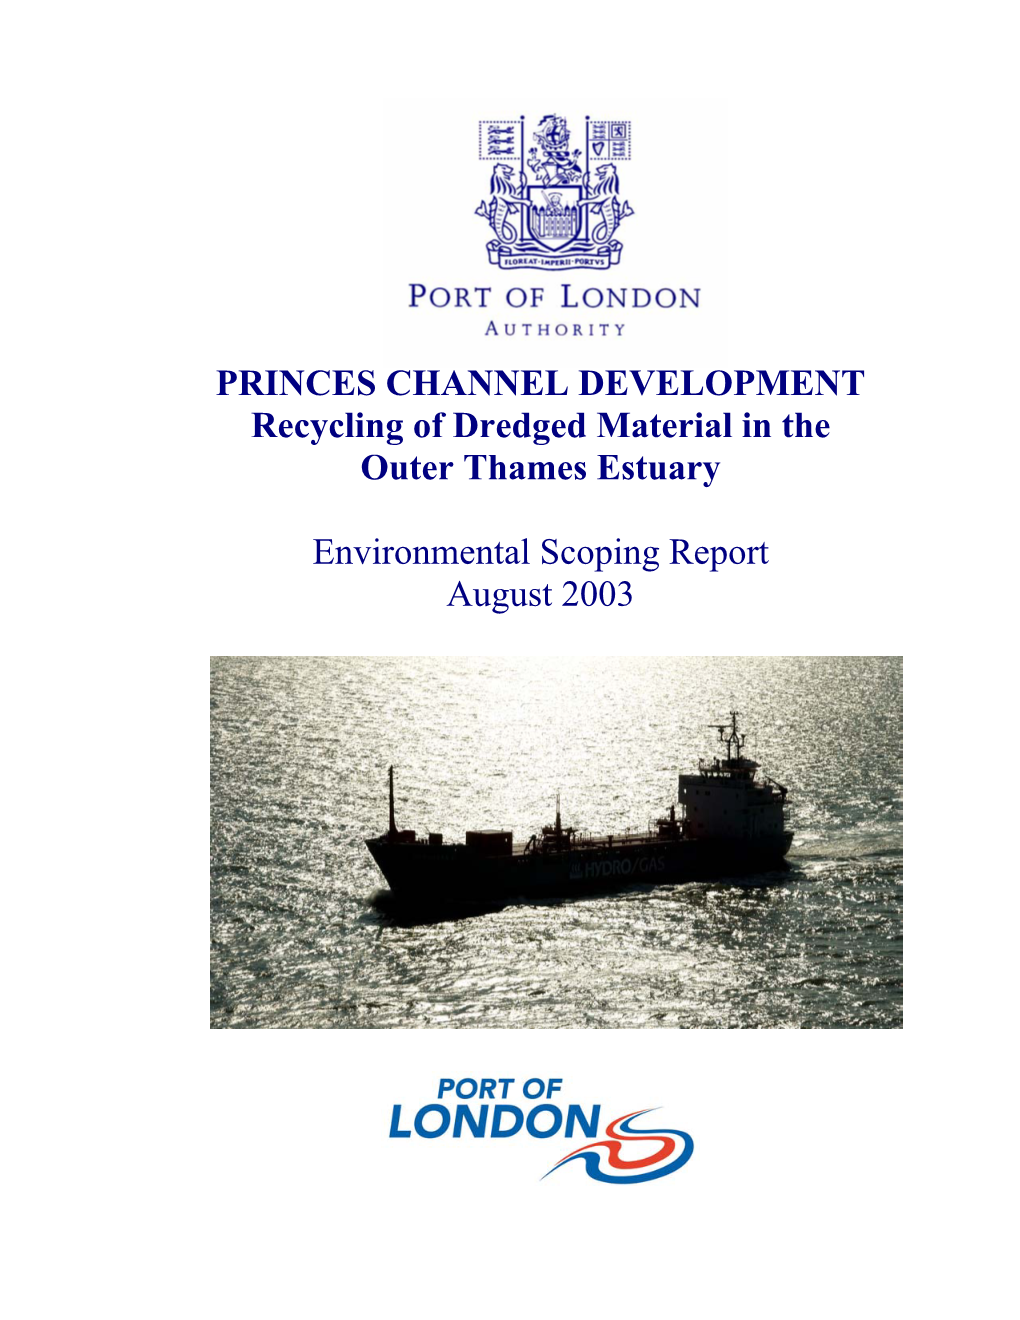 PRINCES CHANNEL DEVELOPMENT Recycling of Dredged Material in the Outer Thames Estuary